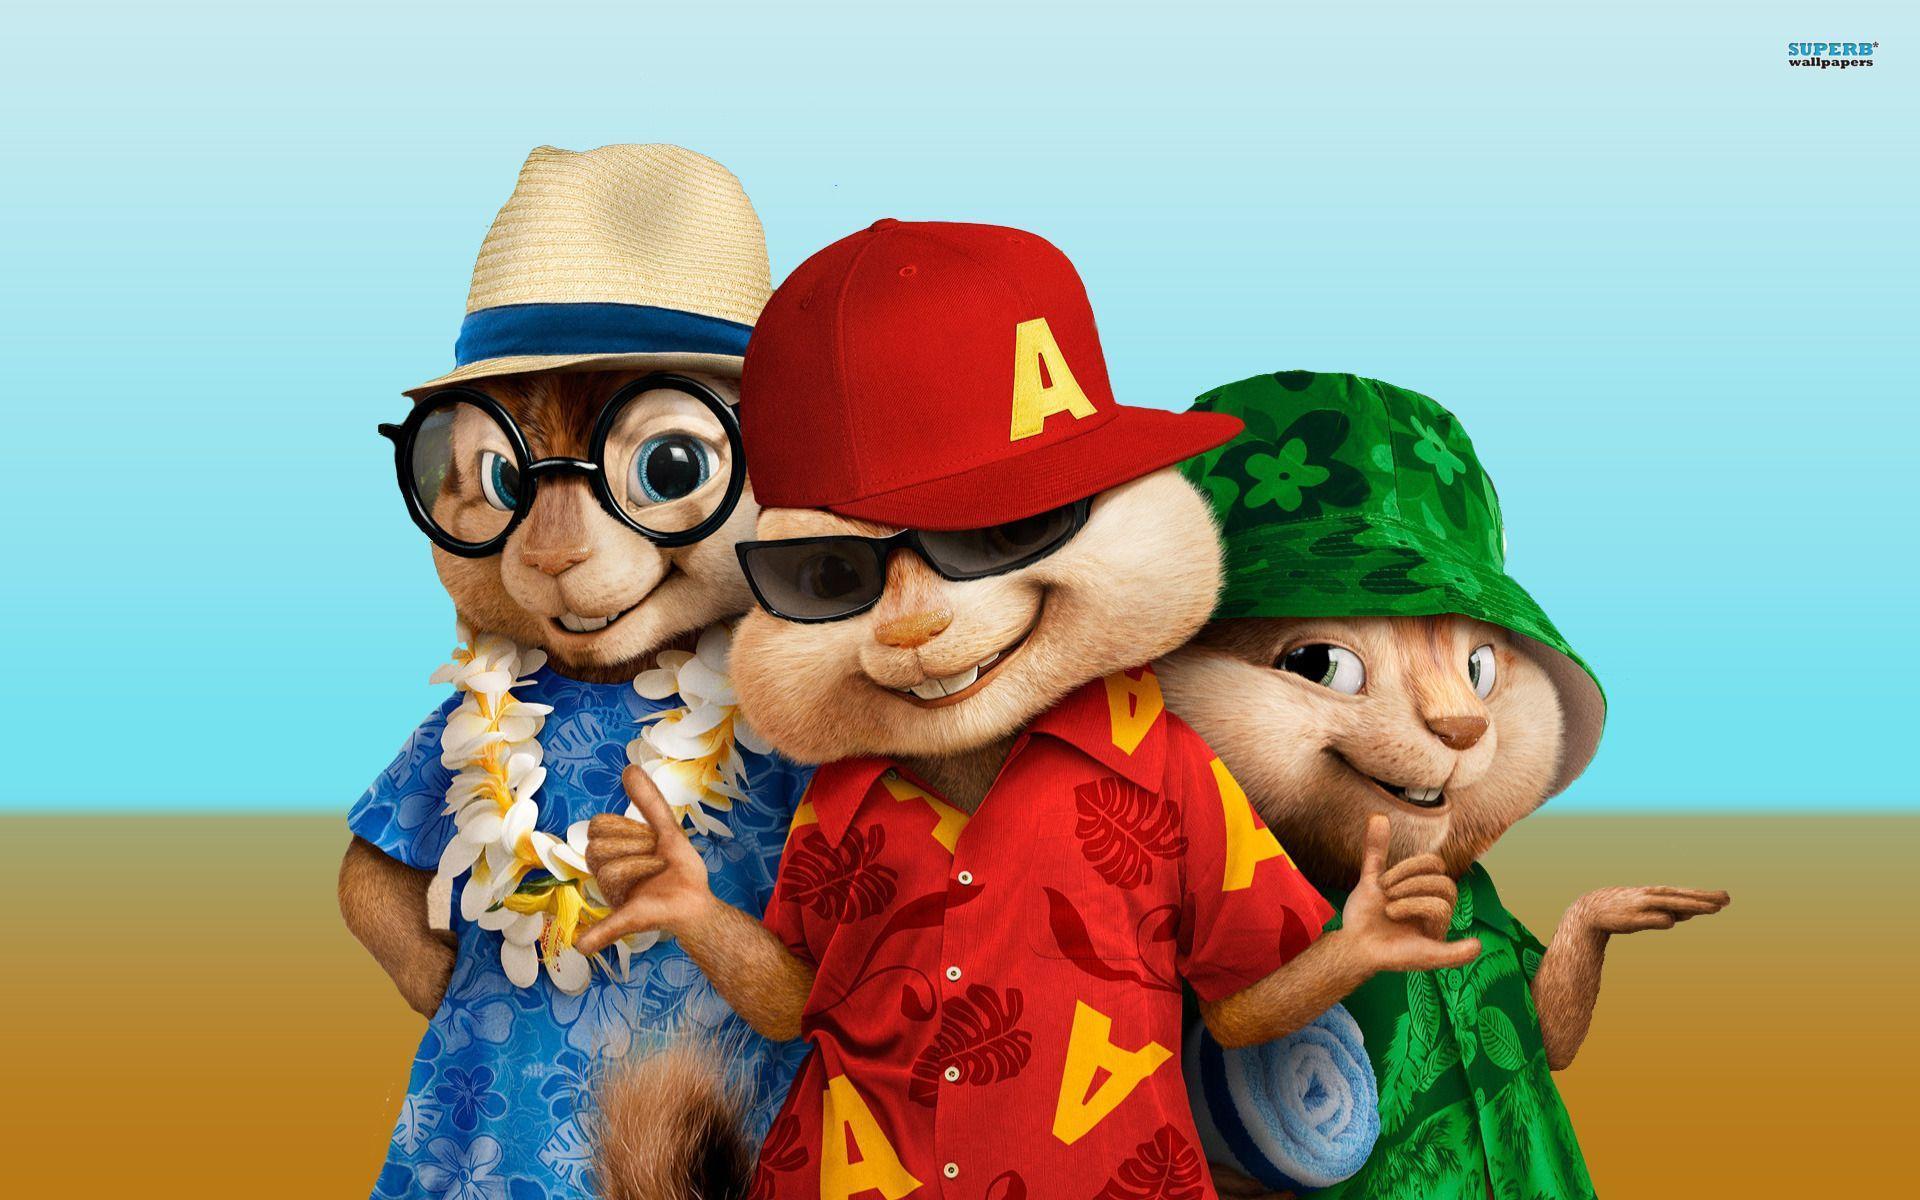 For Your Desktop: Alvin And The Chipmunks Wallpaper, 36 Top